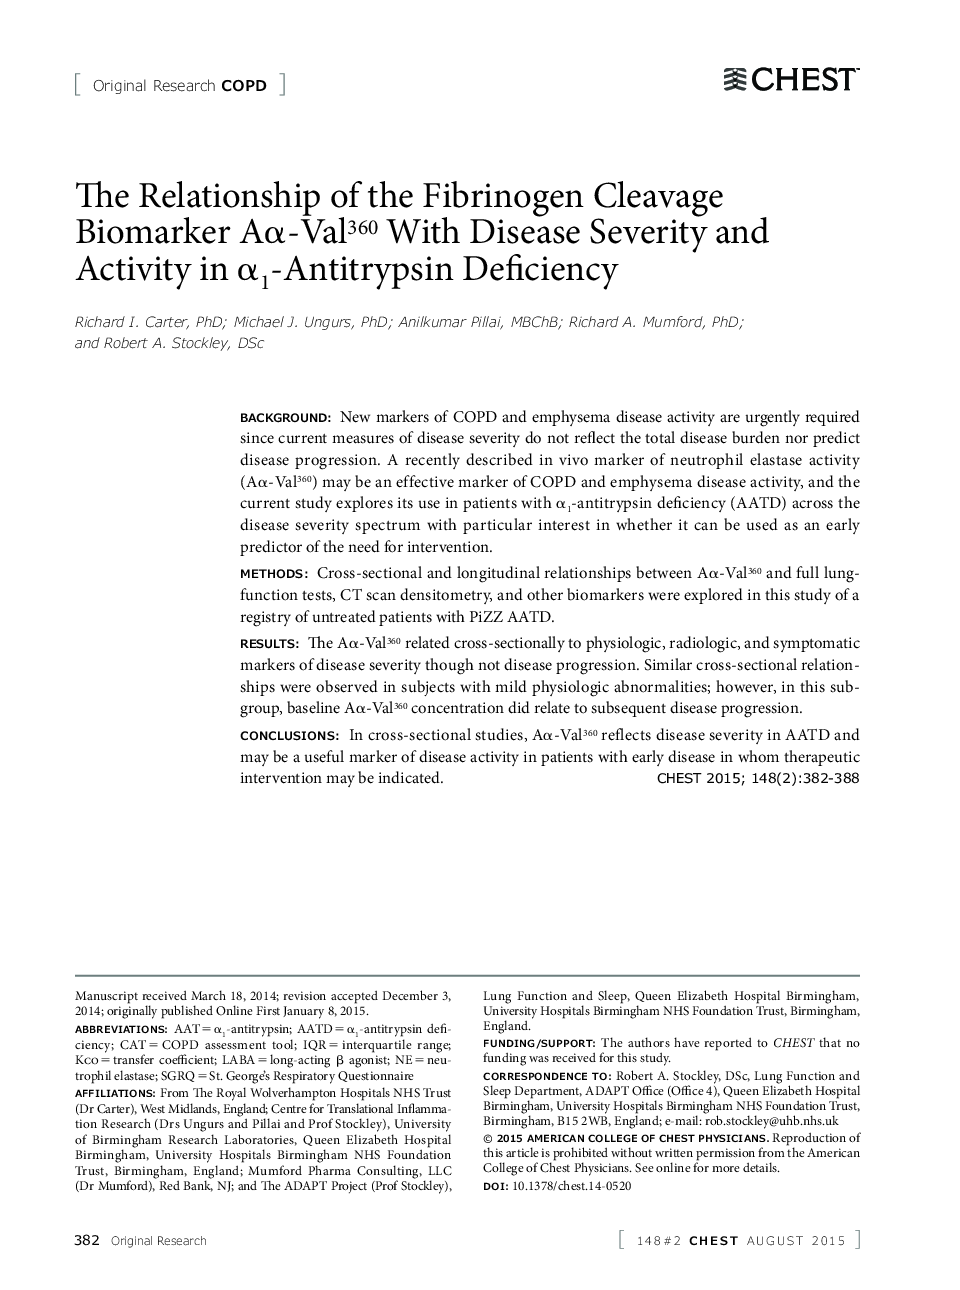 The Relationship of the Fibrinogen Cleavage Biomarker Aa-Val360 With Disease Severity and Activity in Î±1-Antitrypsin Deficiency